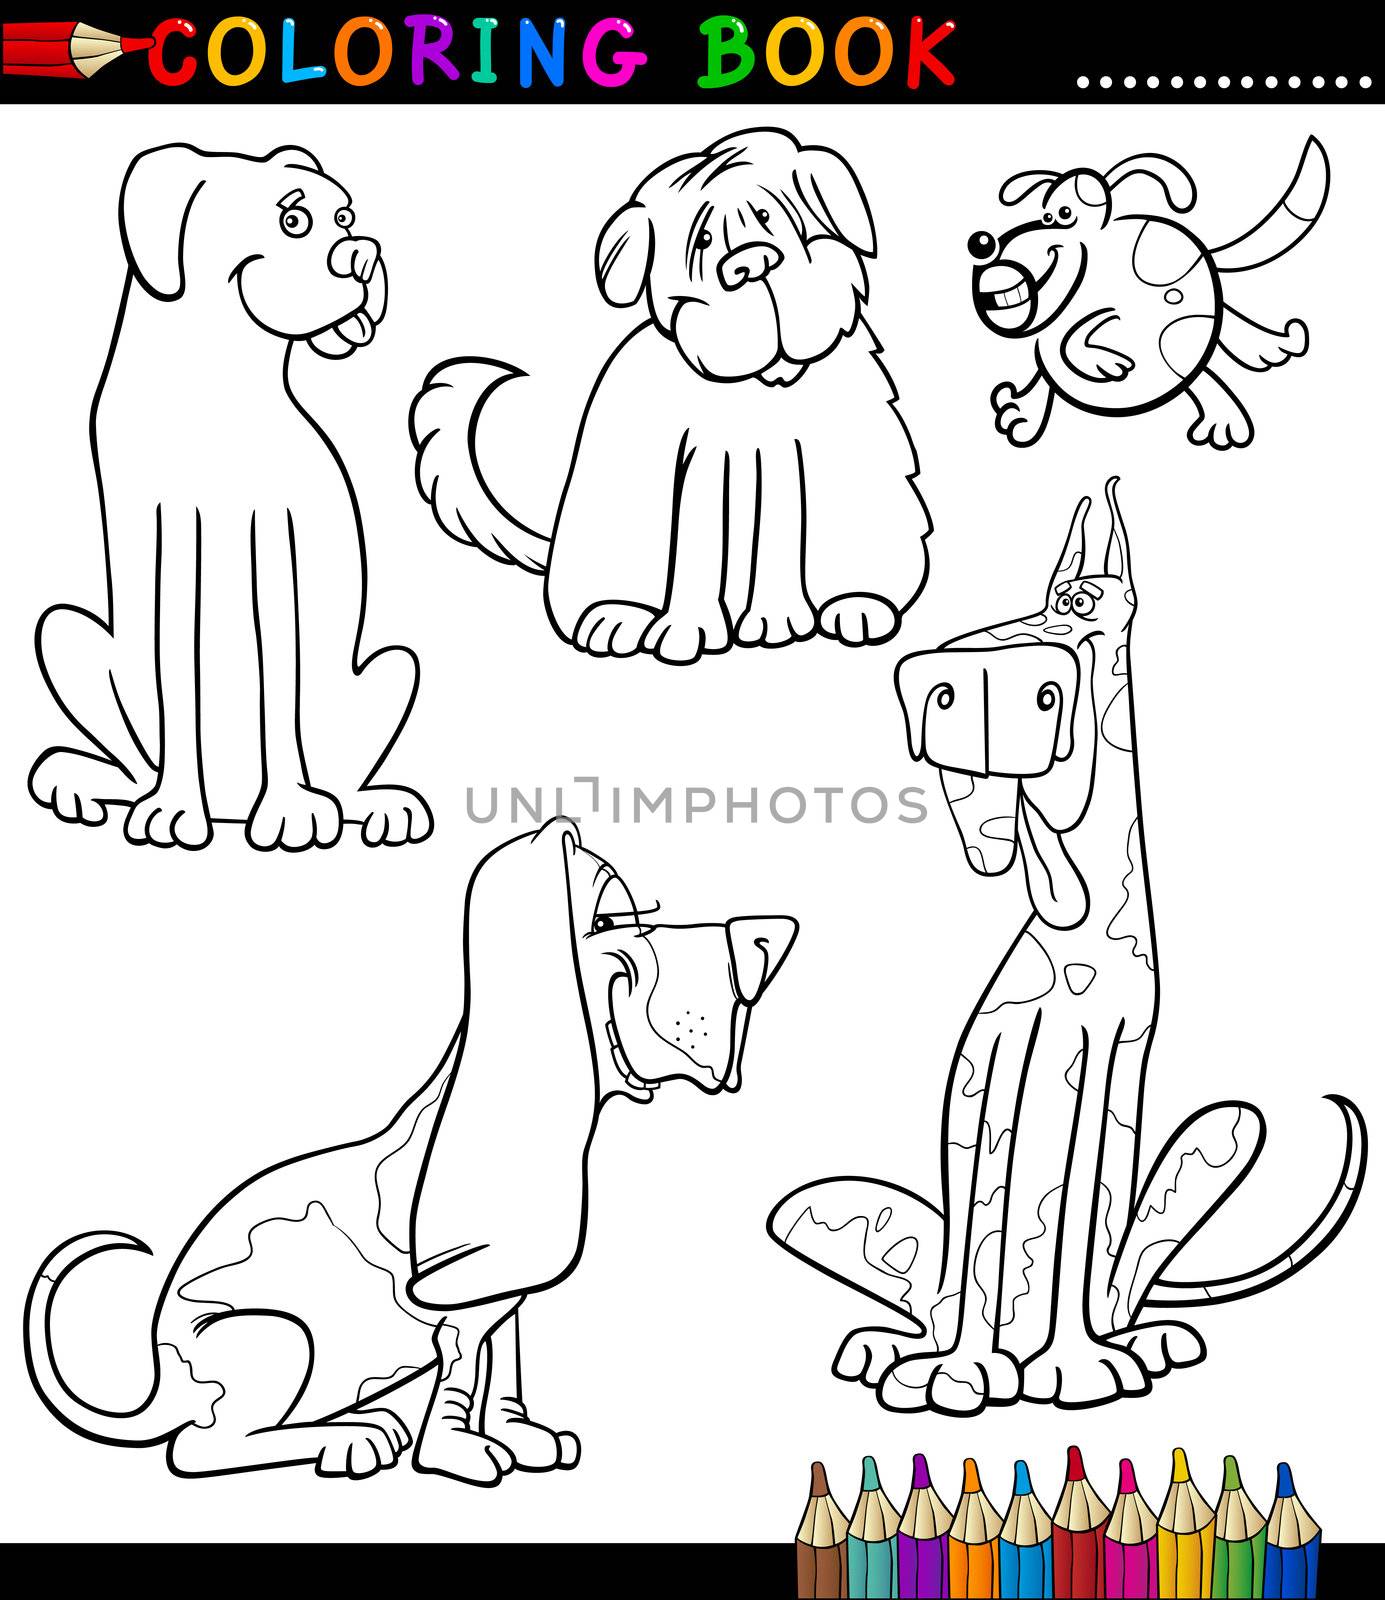 Coloring Book or Page Cartoon Illustration of Funny Dogs or Puppies for Children